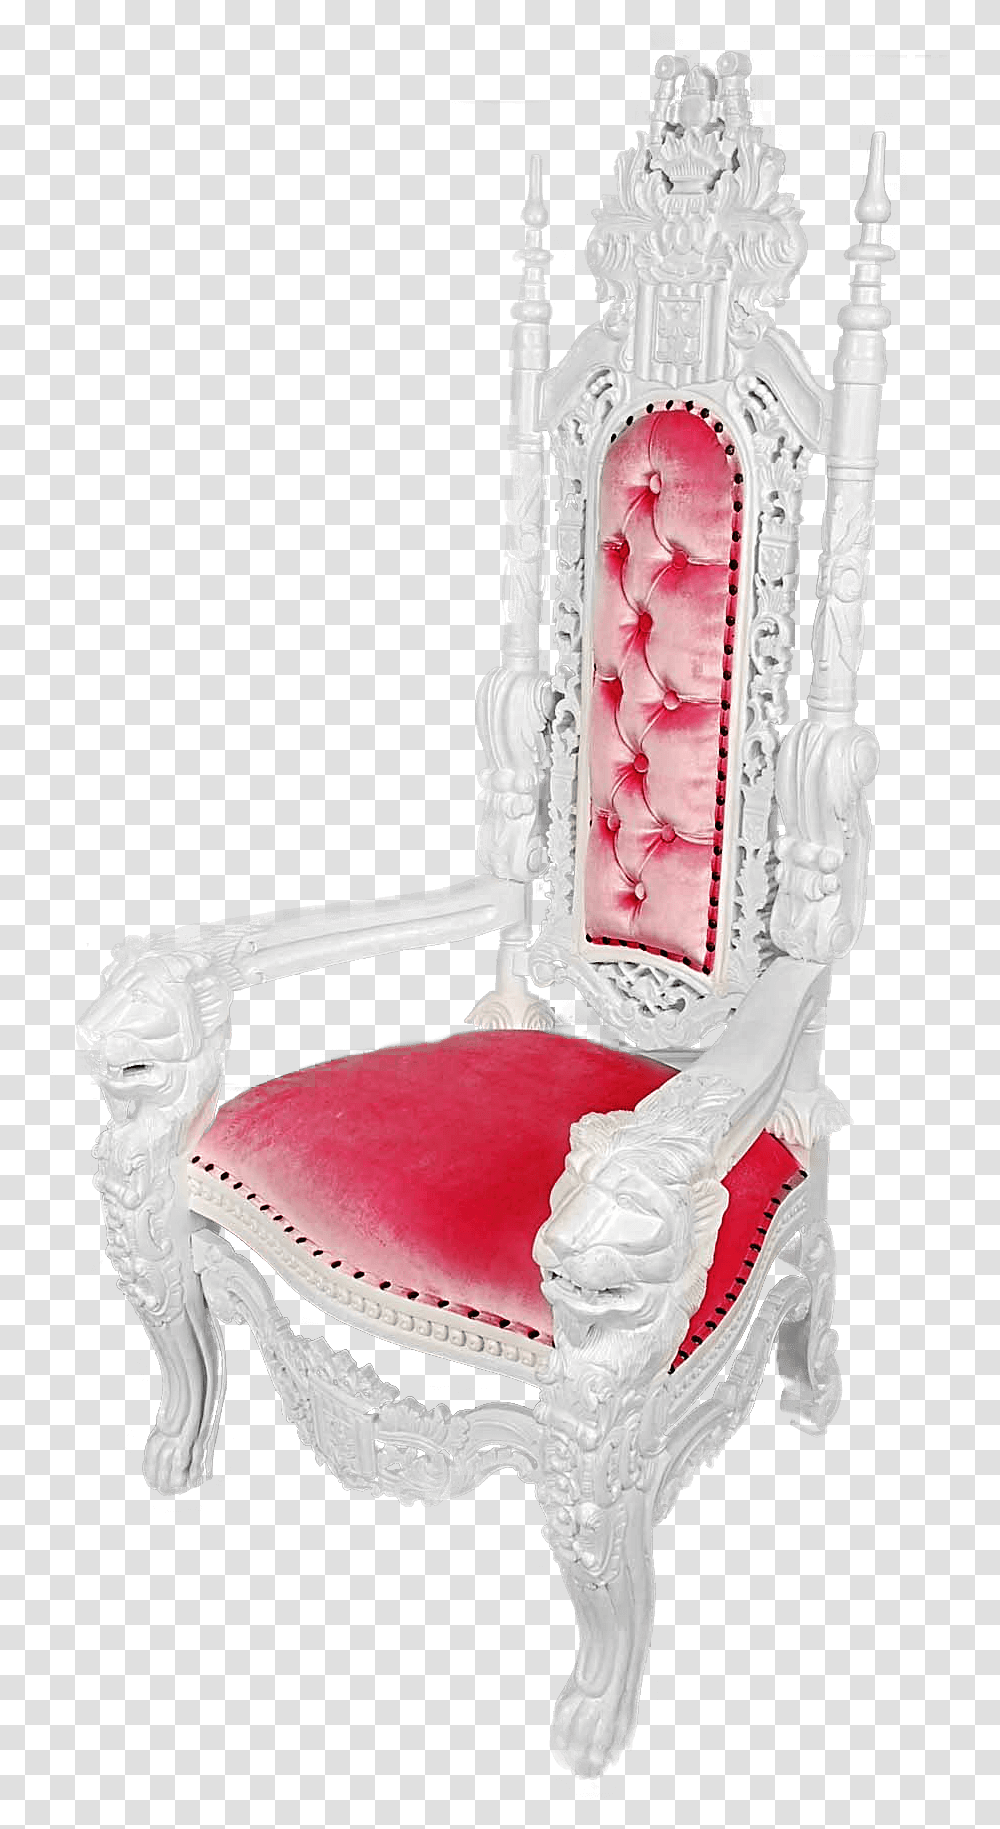 Remarkable Ideas Baby Shower Throne Chair Classy Decoration Throne, Furniture, Wedding Cake, Dessert, Food Transparent Png